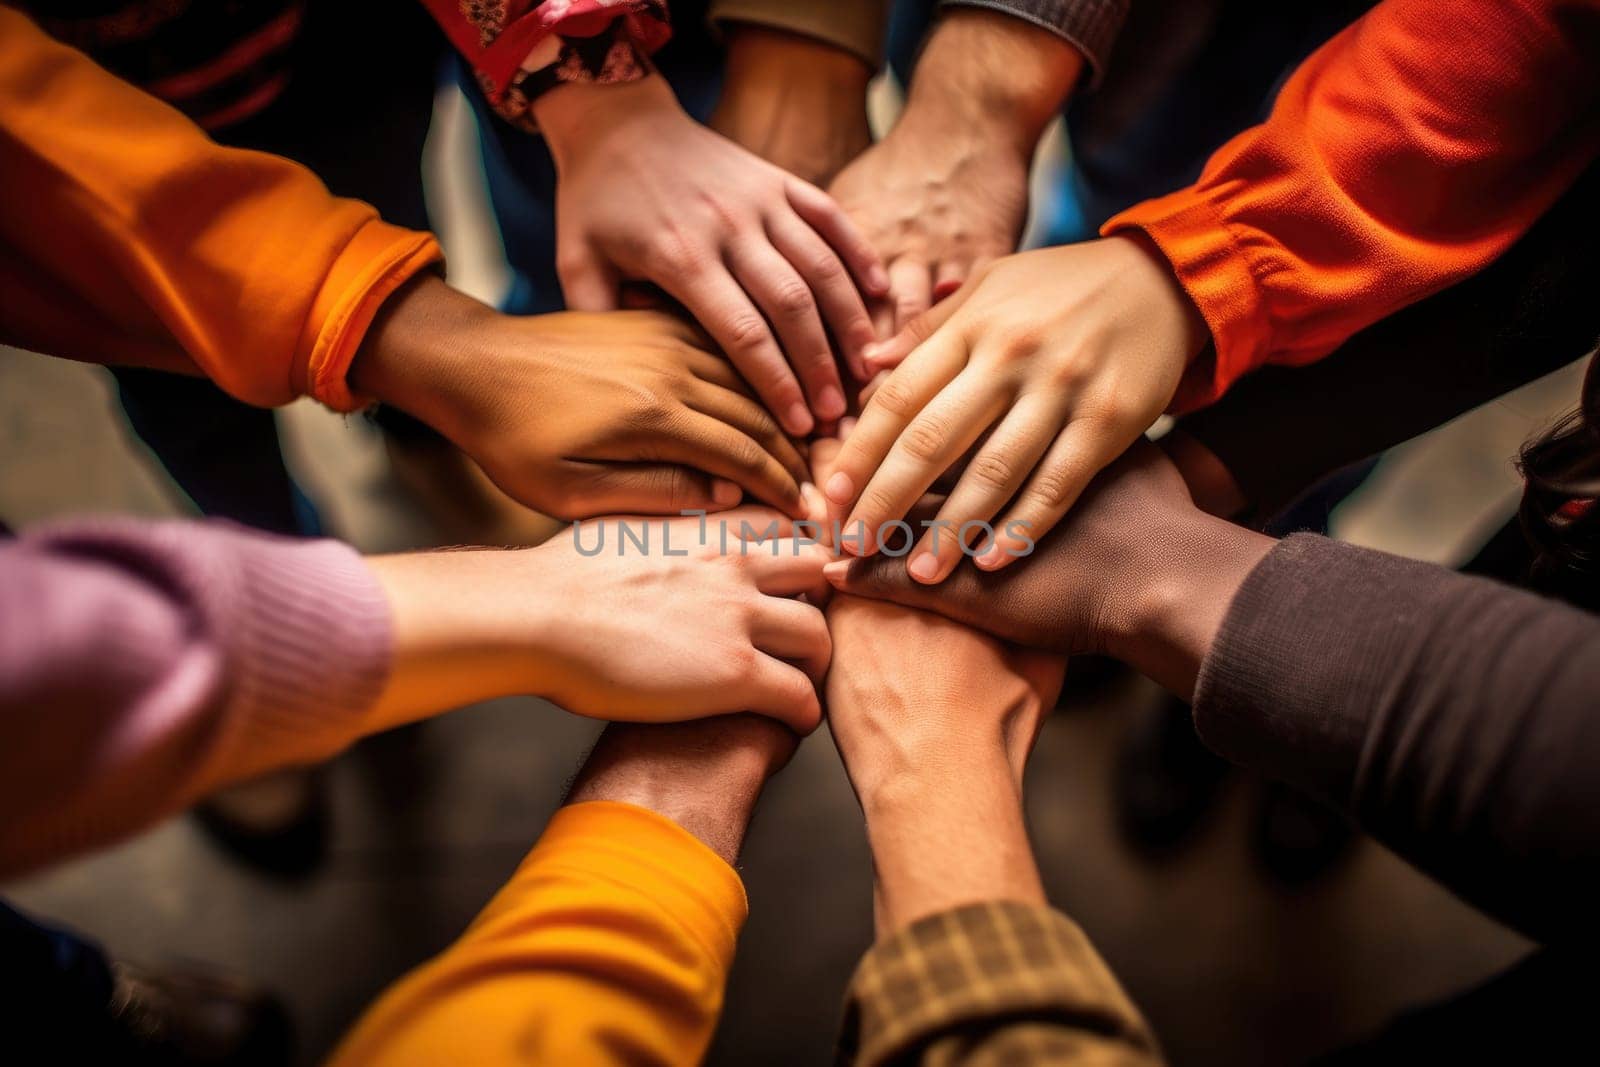 Many hands of different races and ethnicities. United for equality, team work, no room for racism.